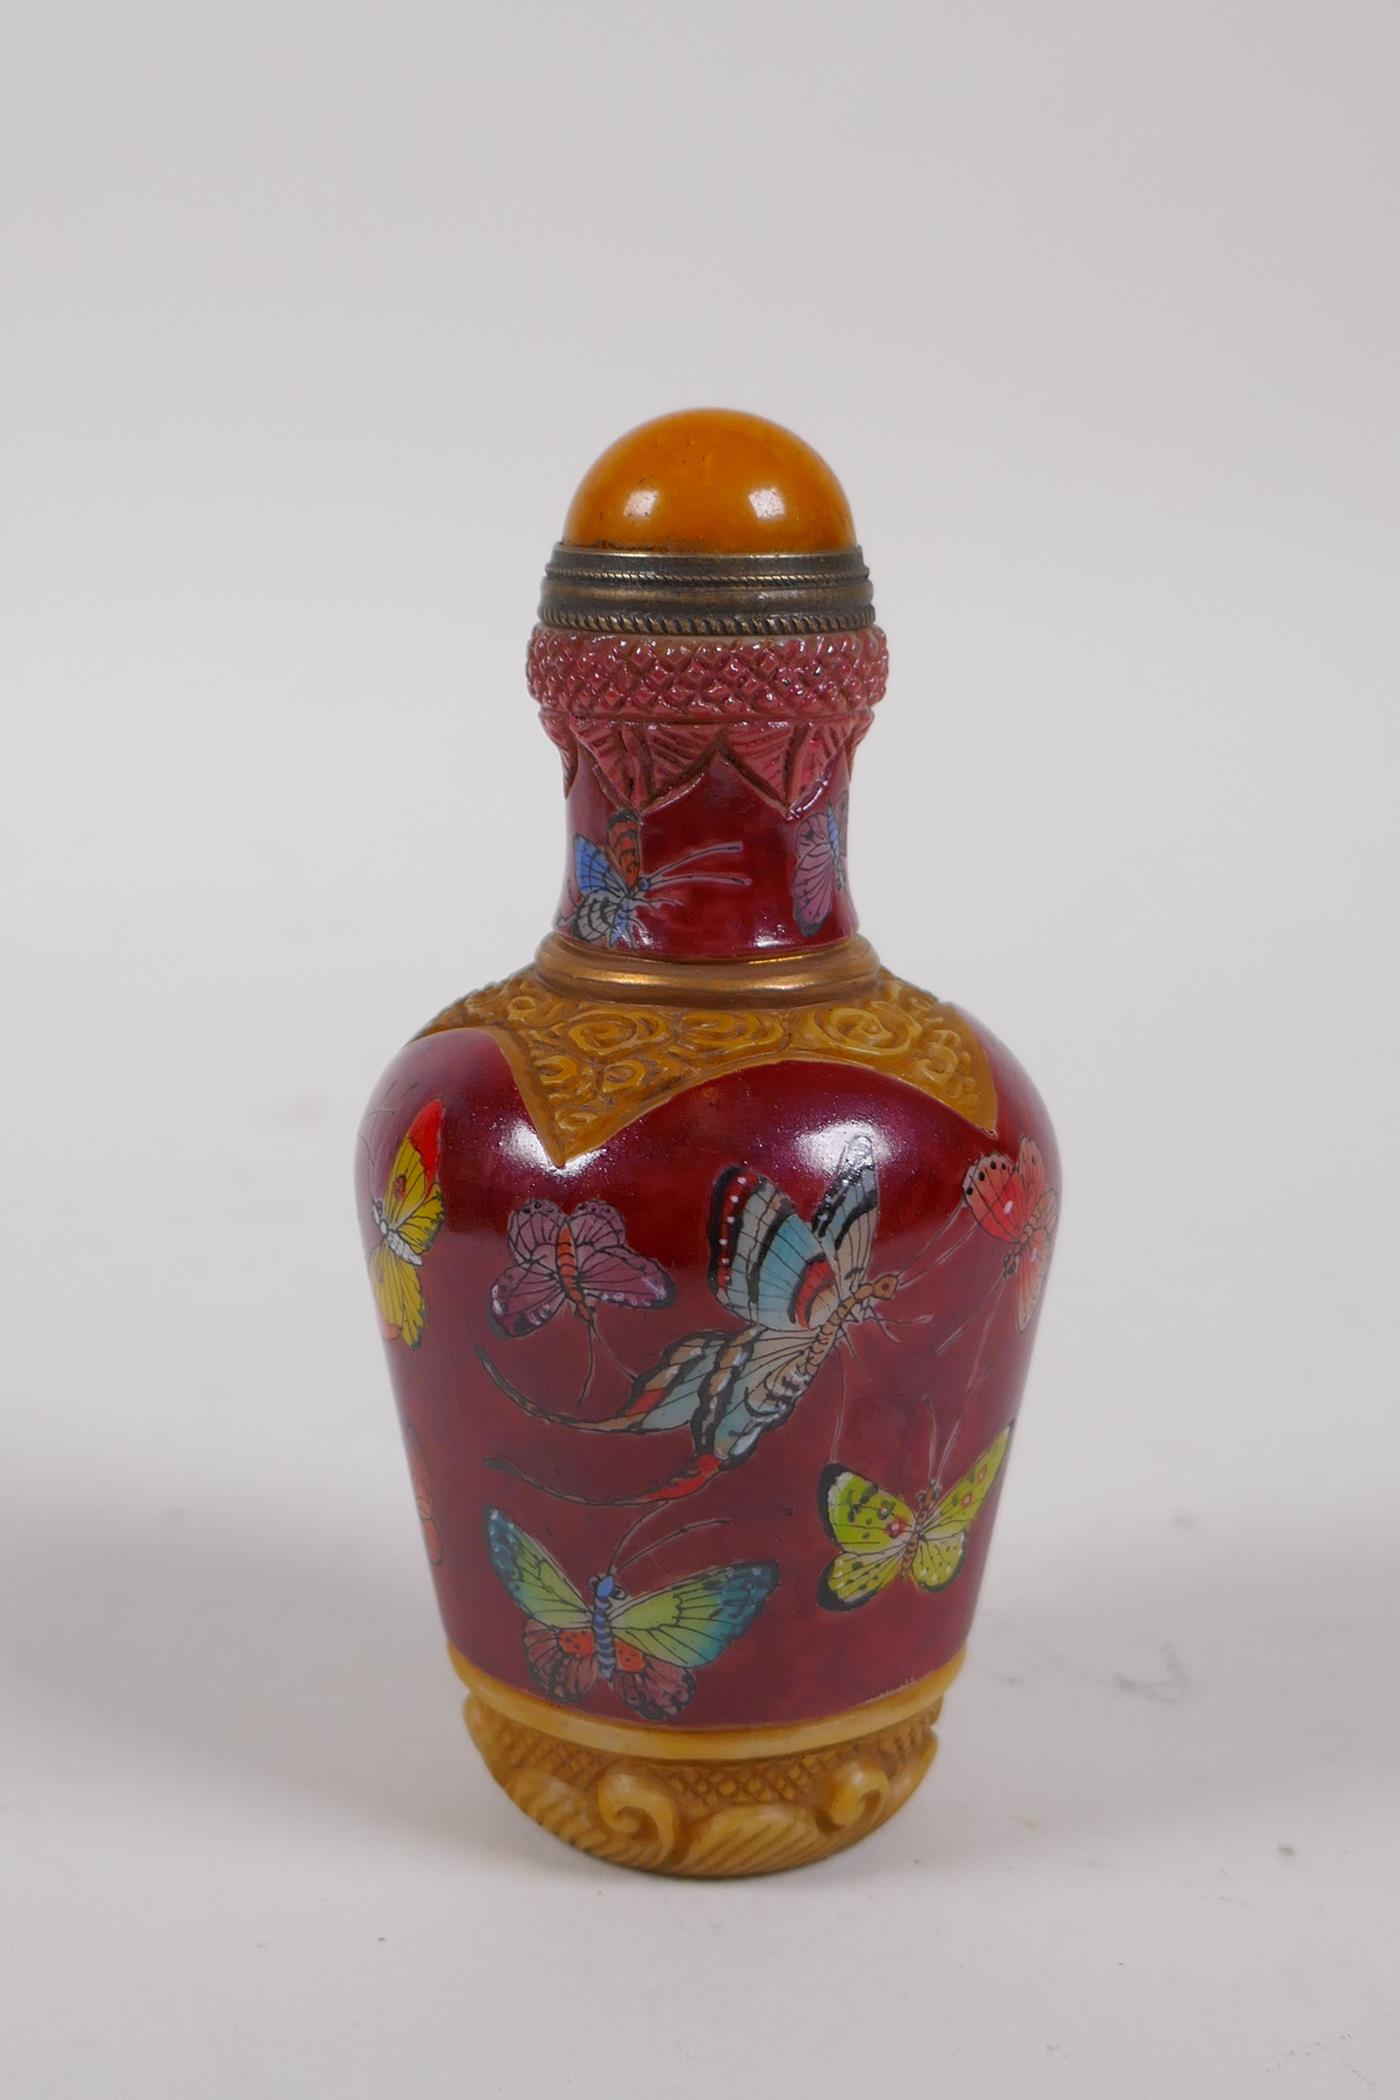 A Chinese moulded glass snuff bottle with enamelled butterfly decoration, 4 character mark to